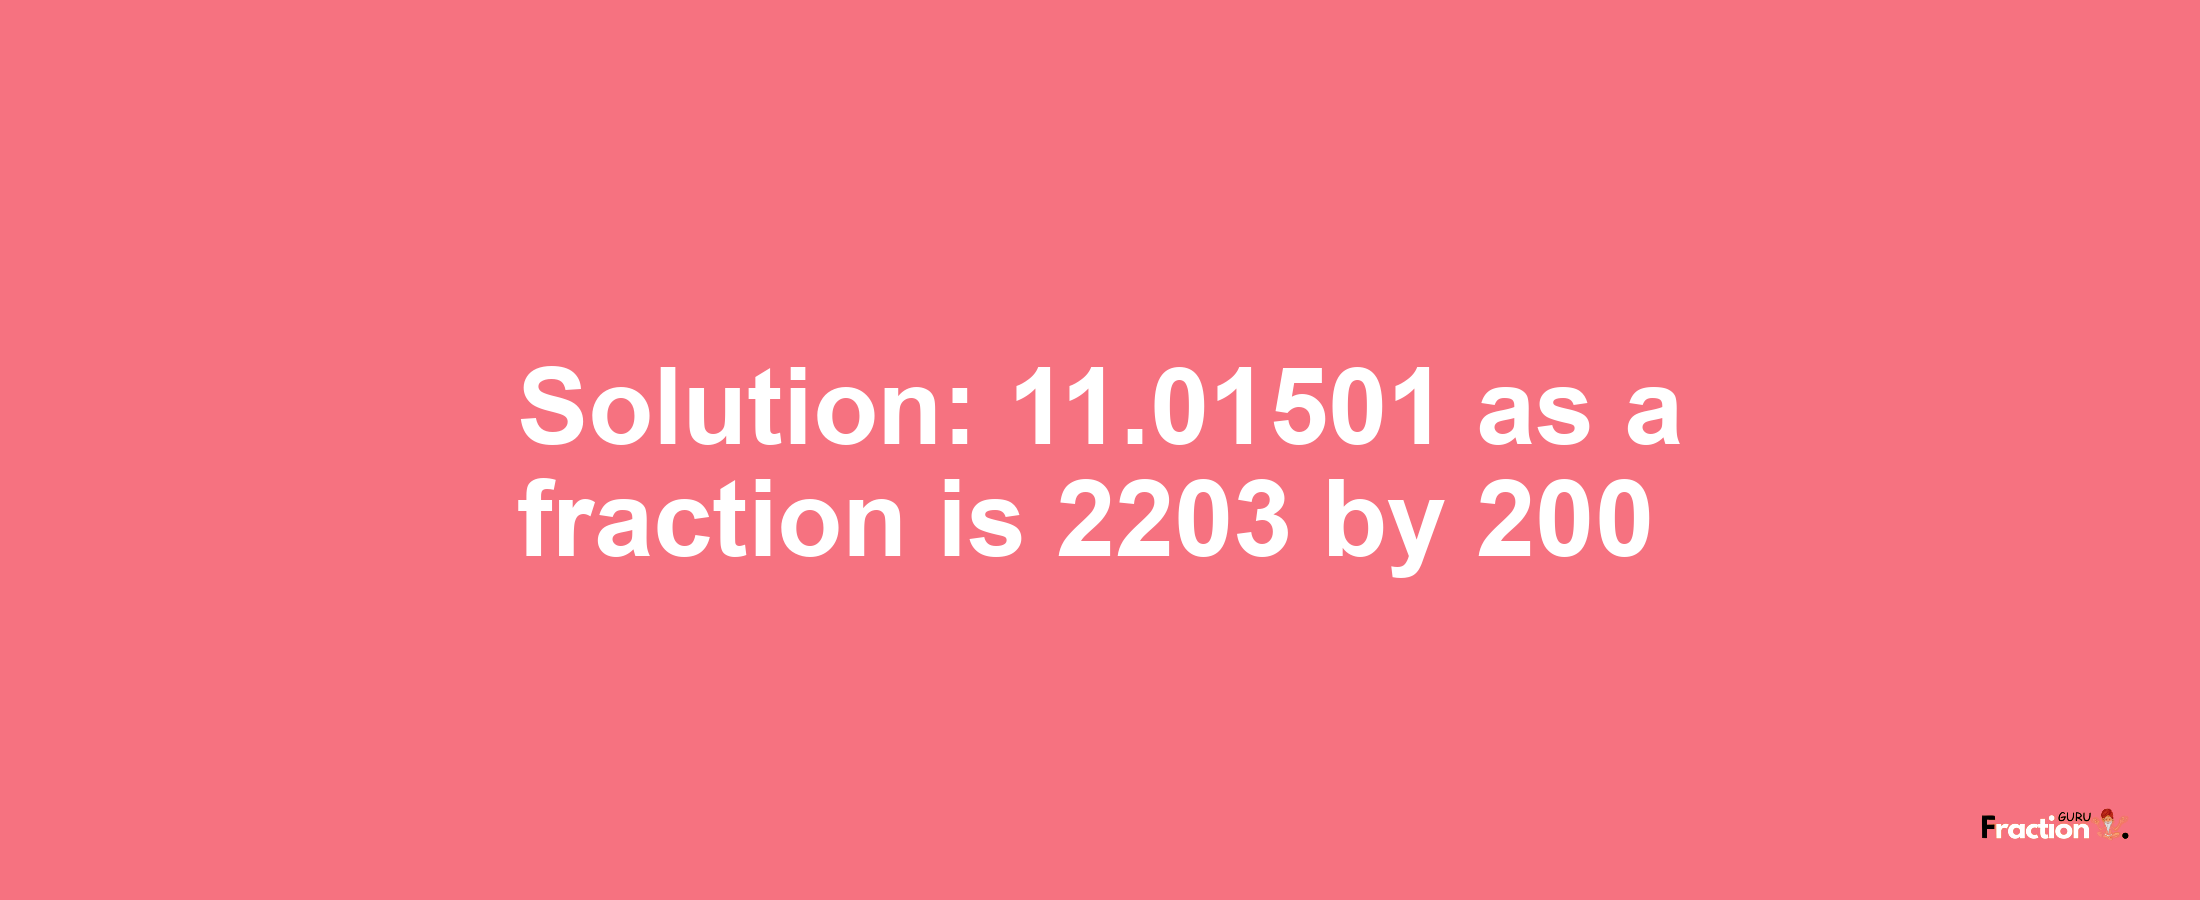 Solution:11.01501 as a fraction is 2203/200